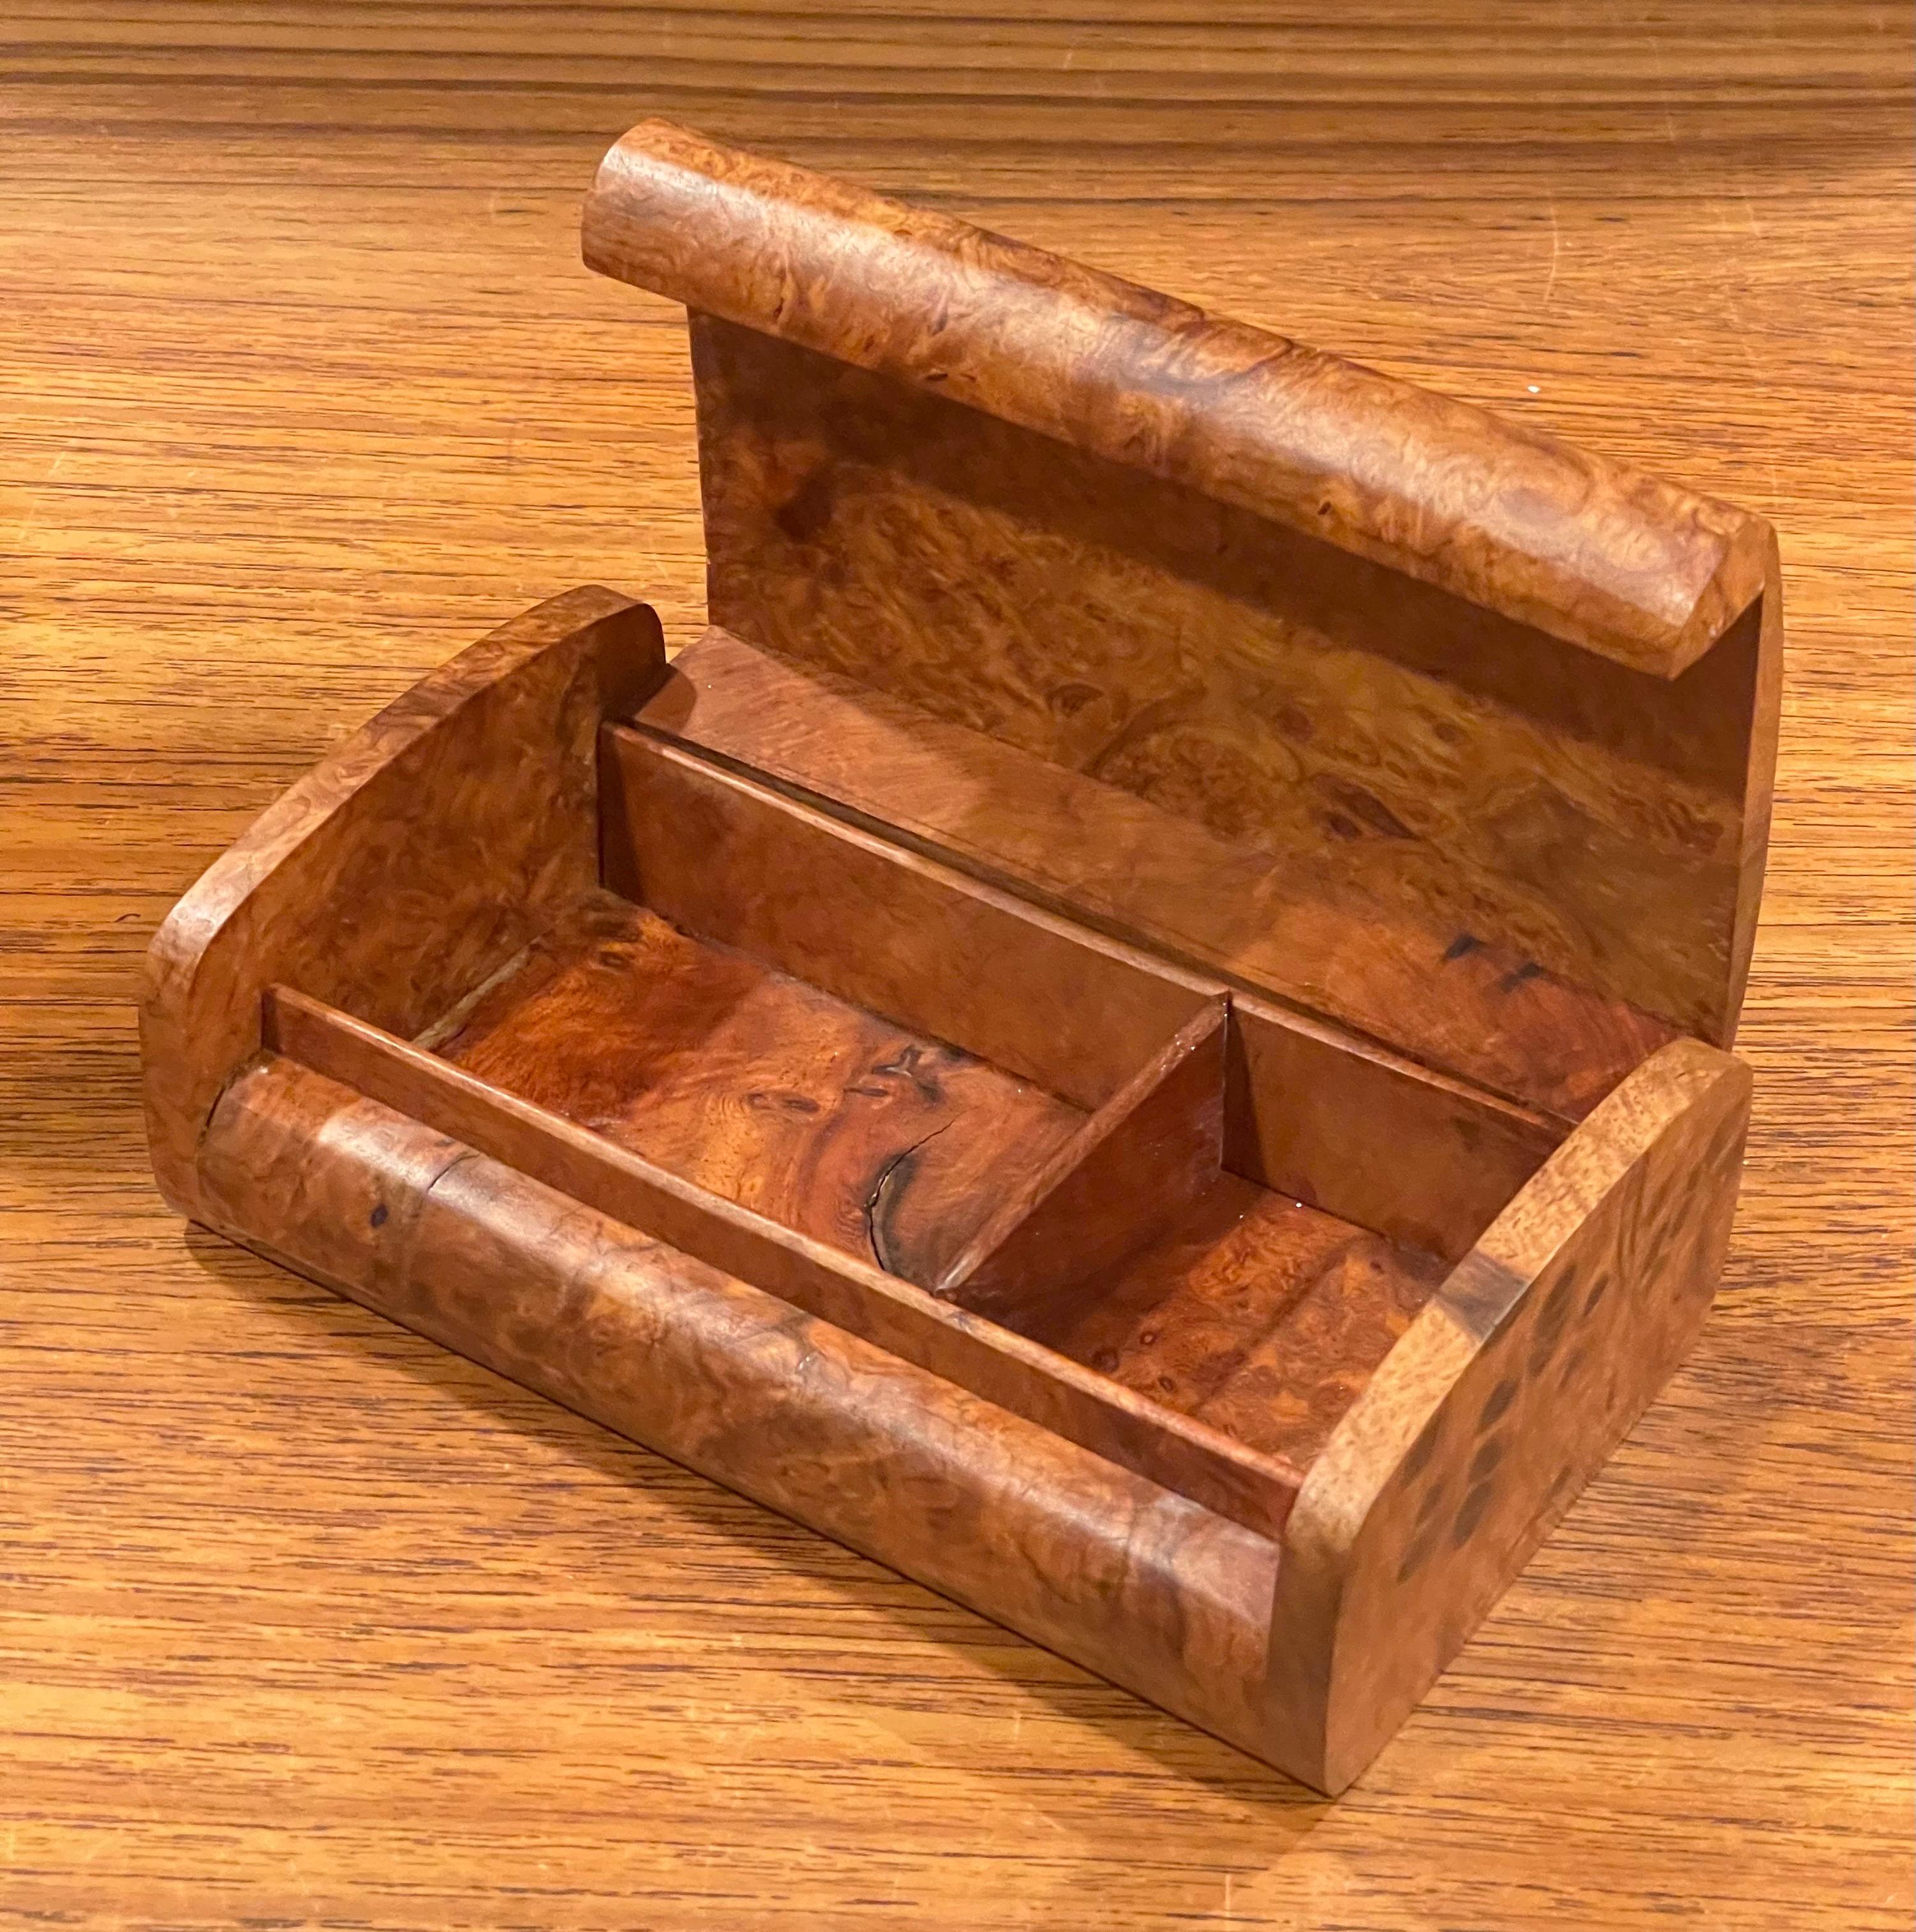 Sleek and stylish burl wood lidded box, circa 1990s. The piece is in very good condition and measures 6.625